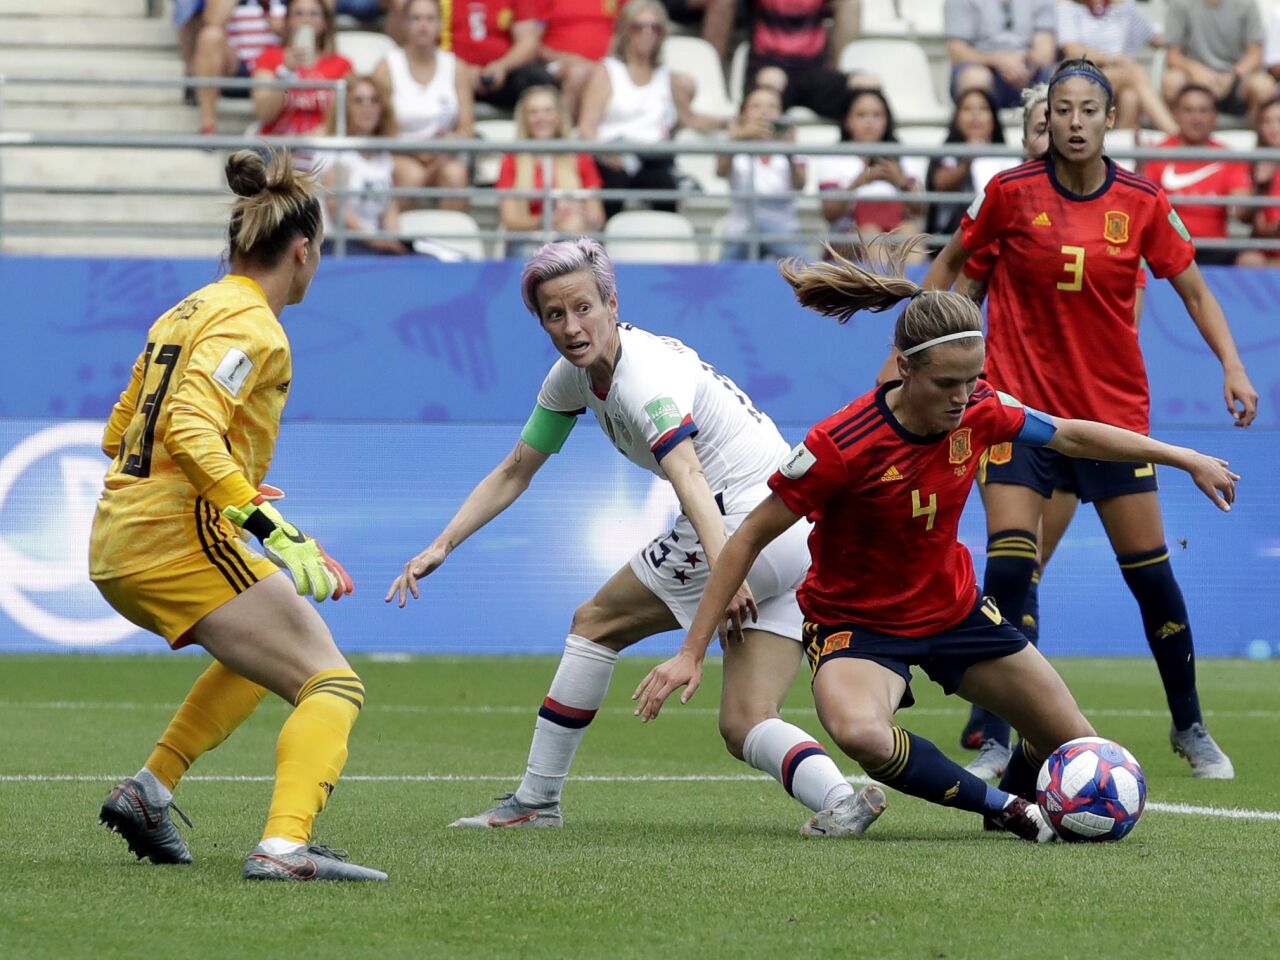 Spain's Irene Paredes, right, defends against Megan Rapinoe of the U.S.